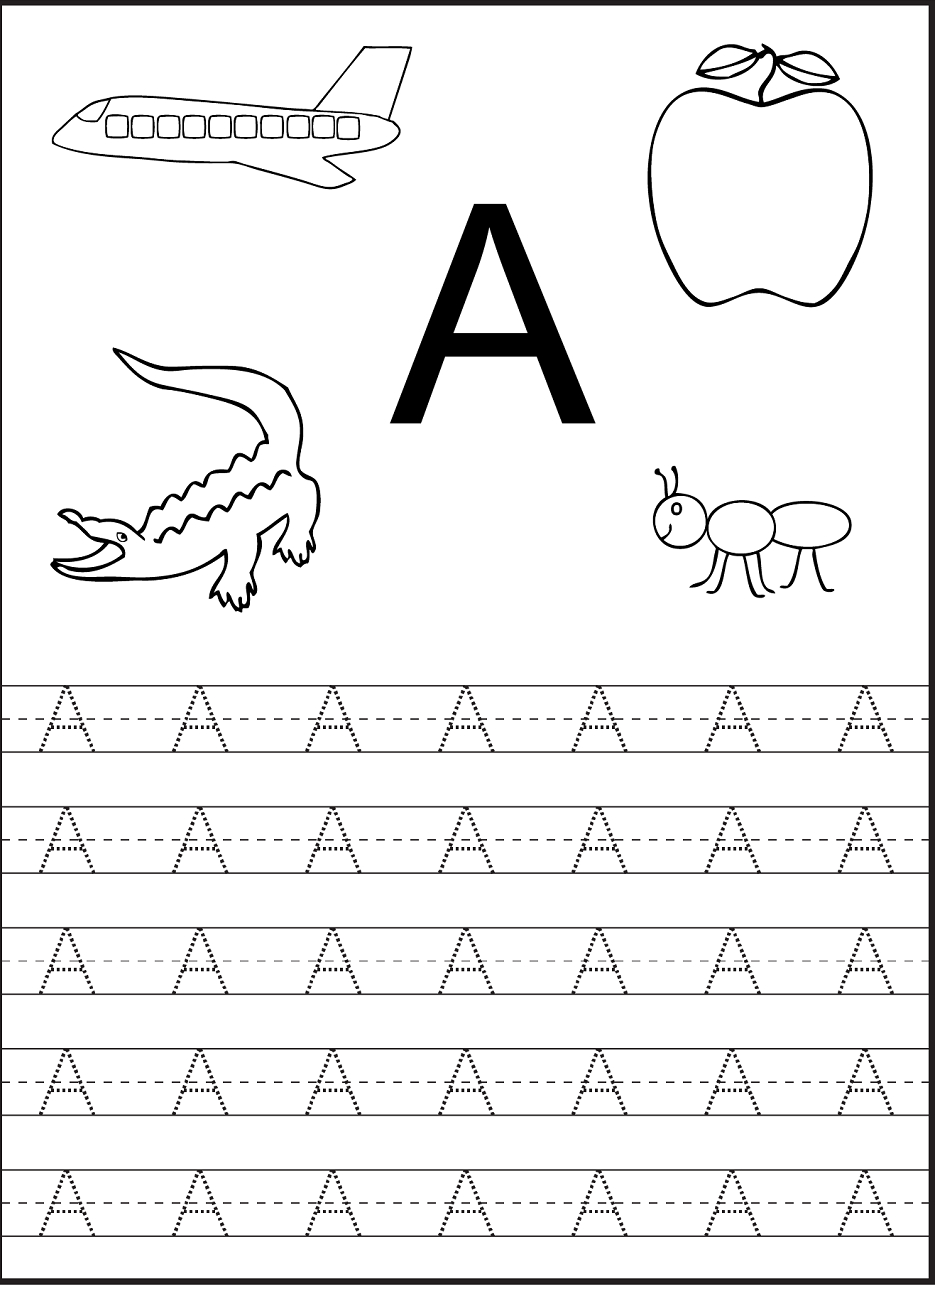 Tracing The Letter A Free Printable | Preschool Worksheets within Preschool Tracing Letters Free Worksheets